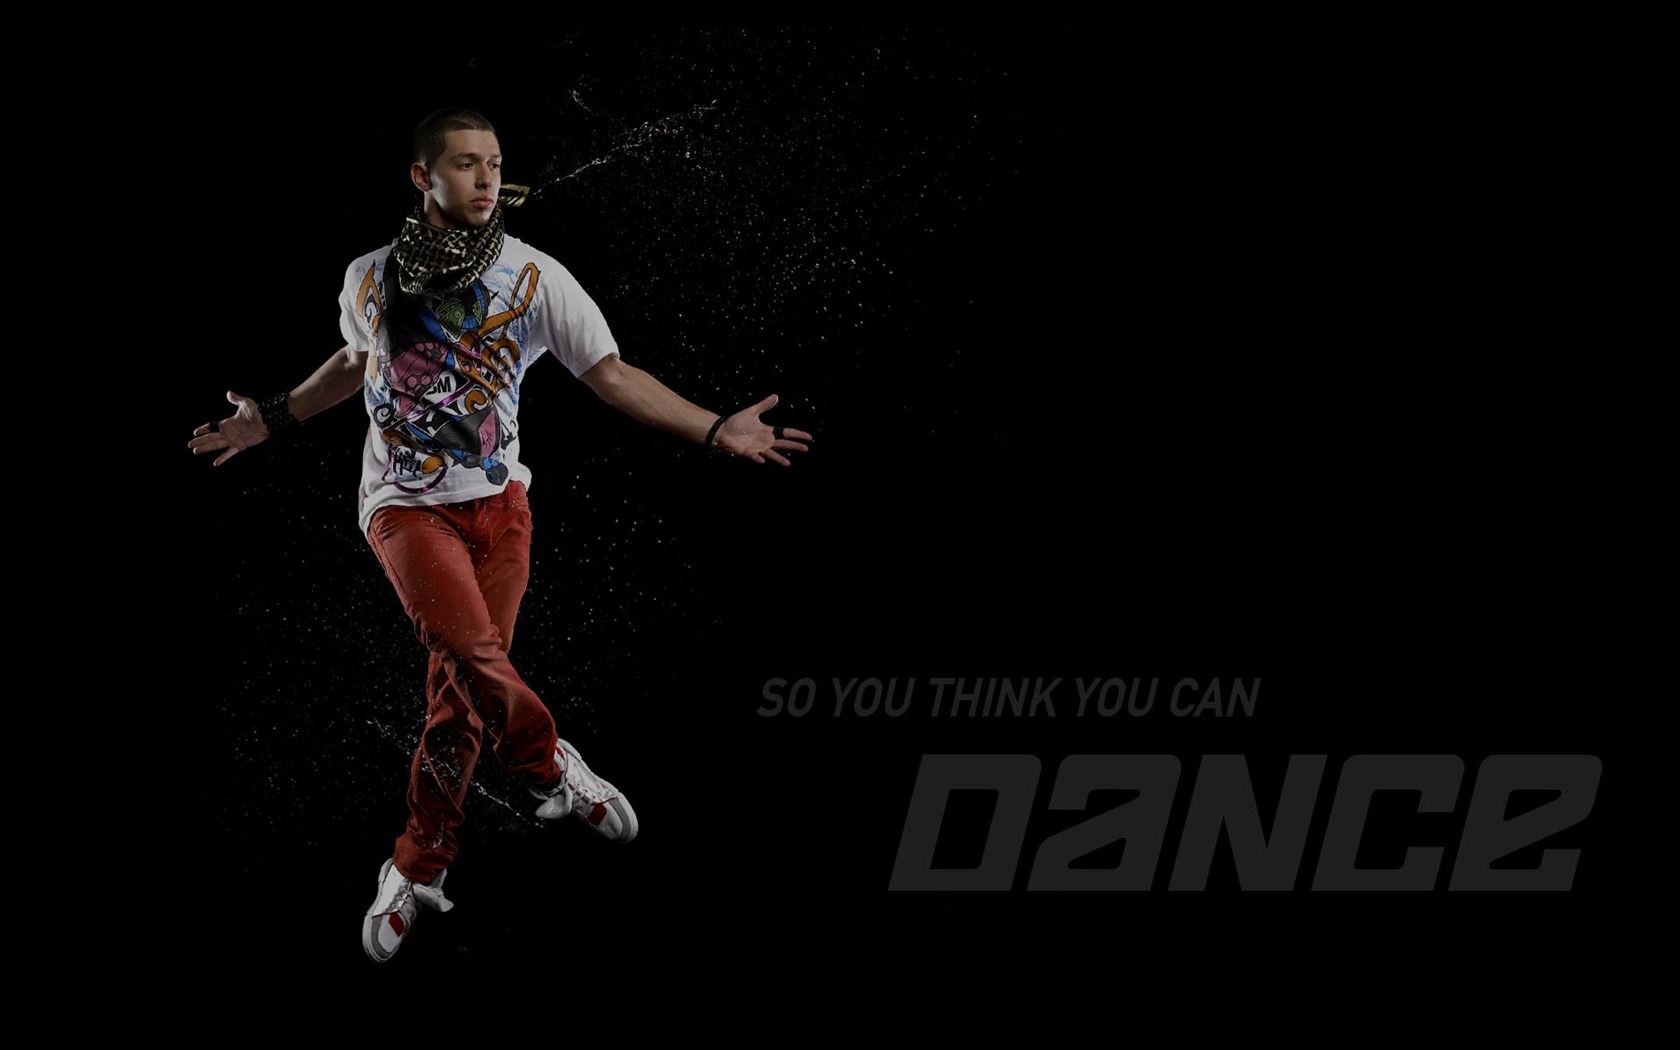 So You Think You Can Dance wallpaper (1) #16 - 1680x1050